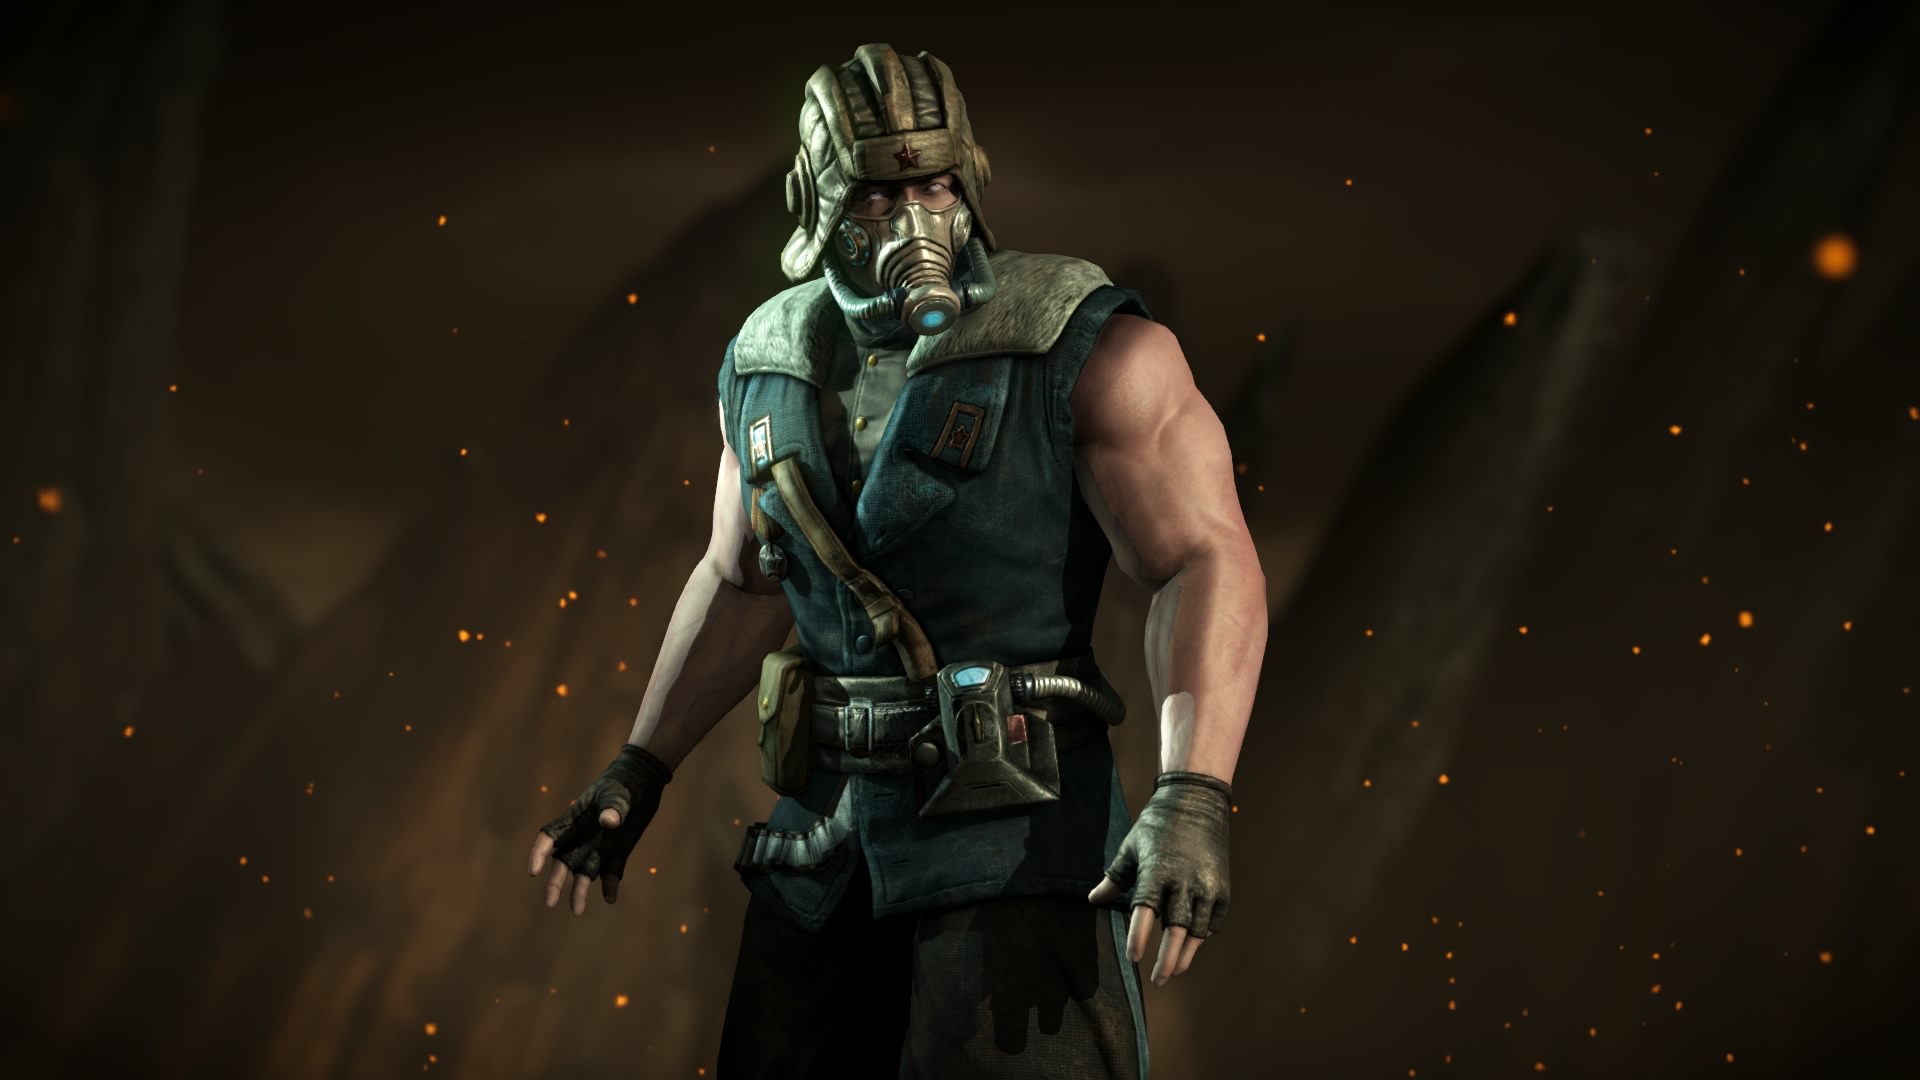 Mortal Kombat X Review 5 Things I Love And Hate About Mortal Kombat X